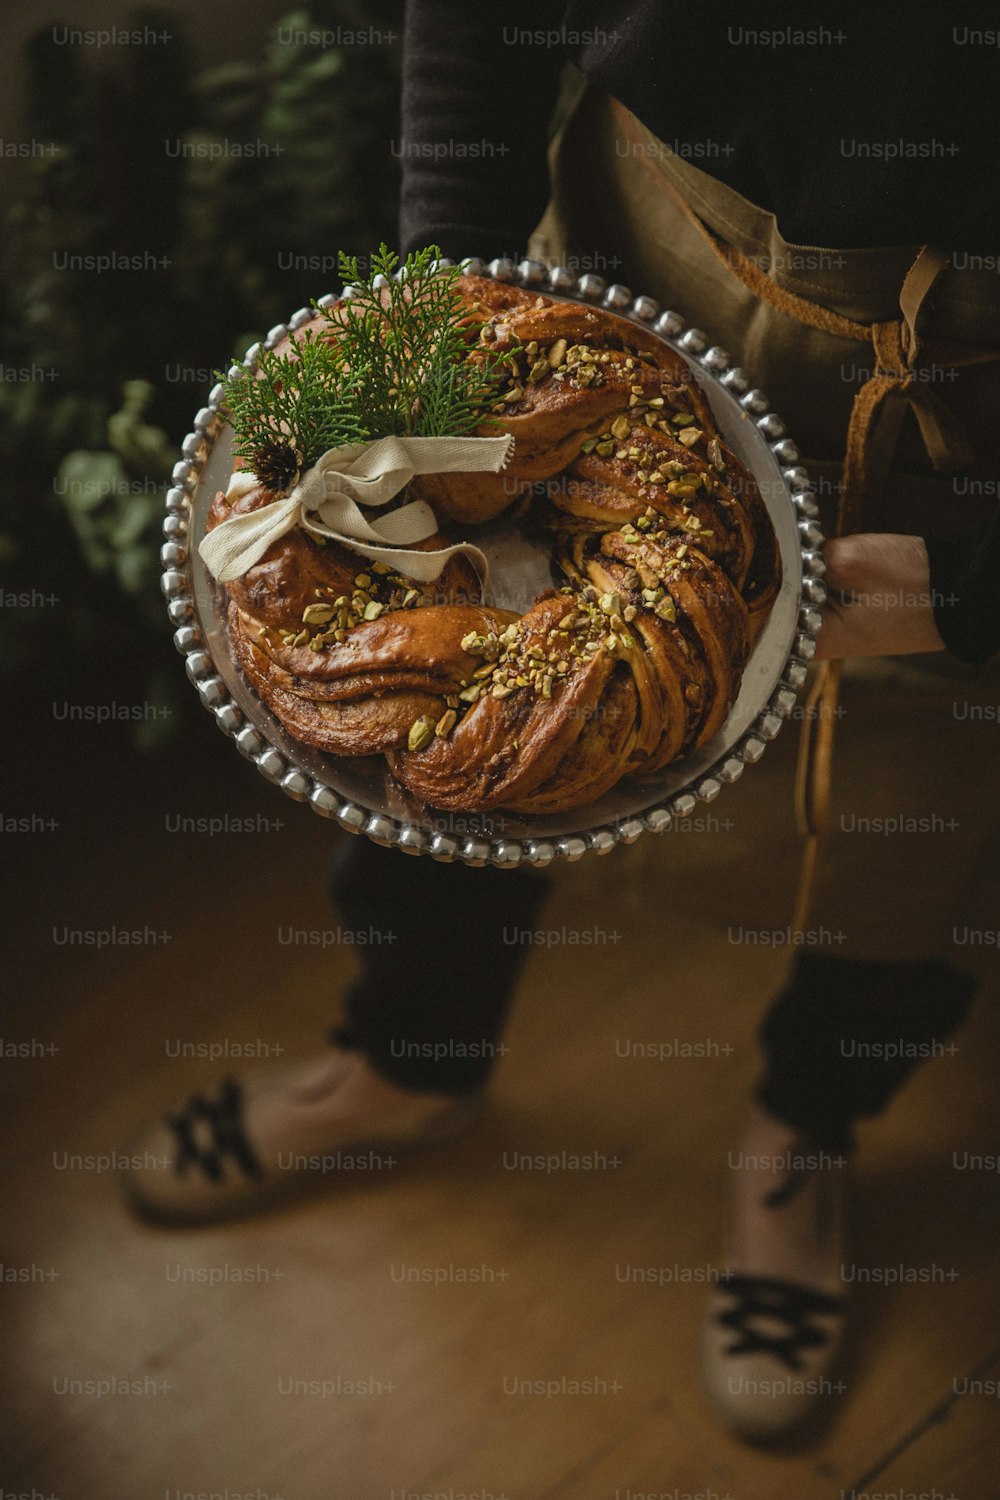 a person holding a platter of food on a wooden floor